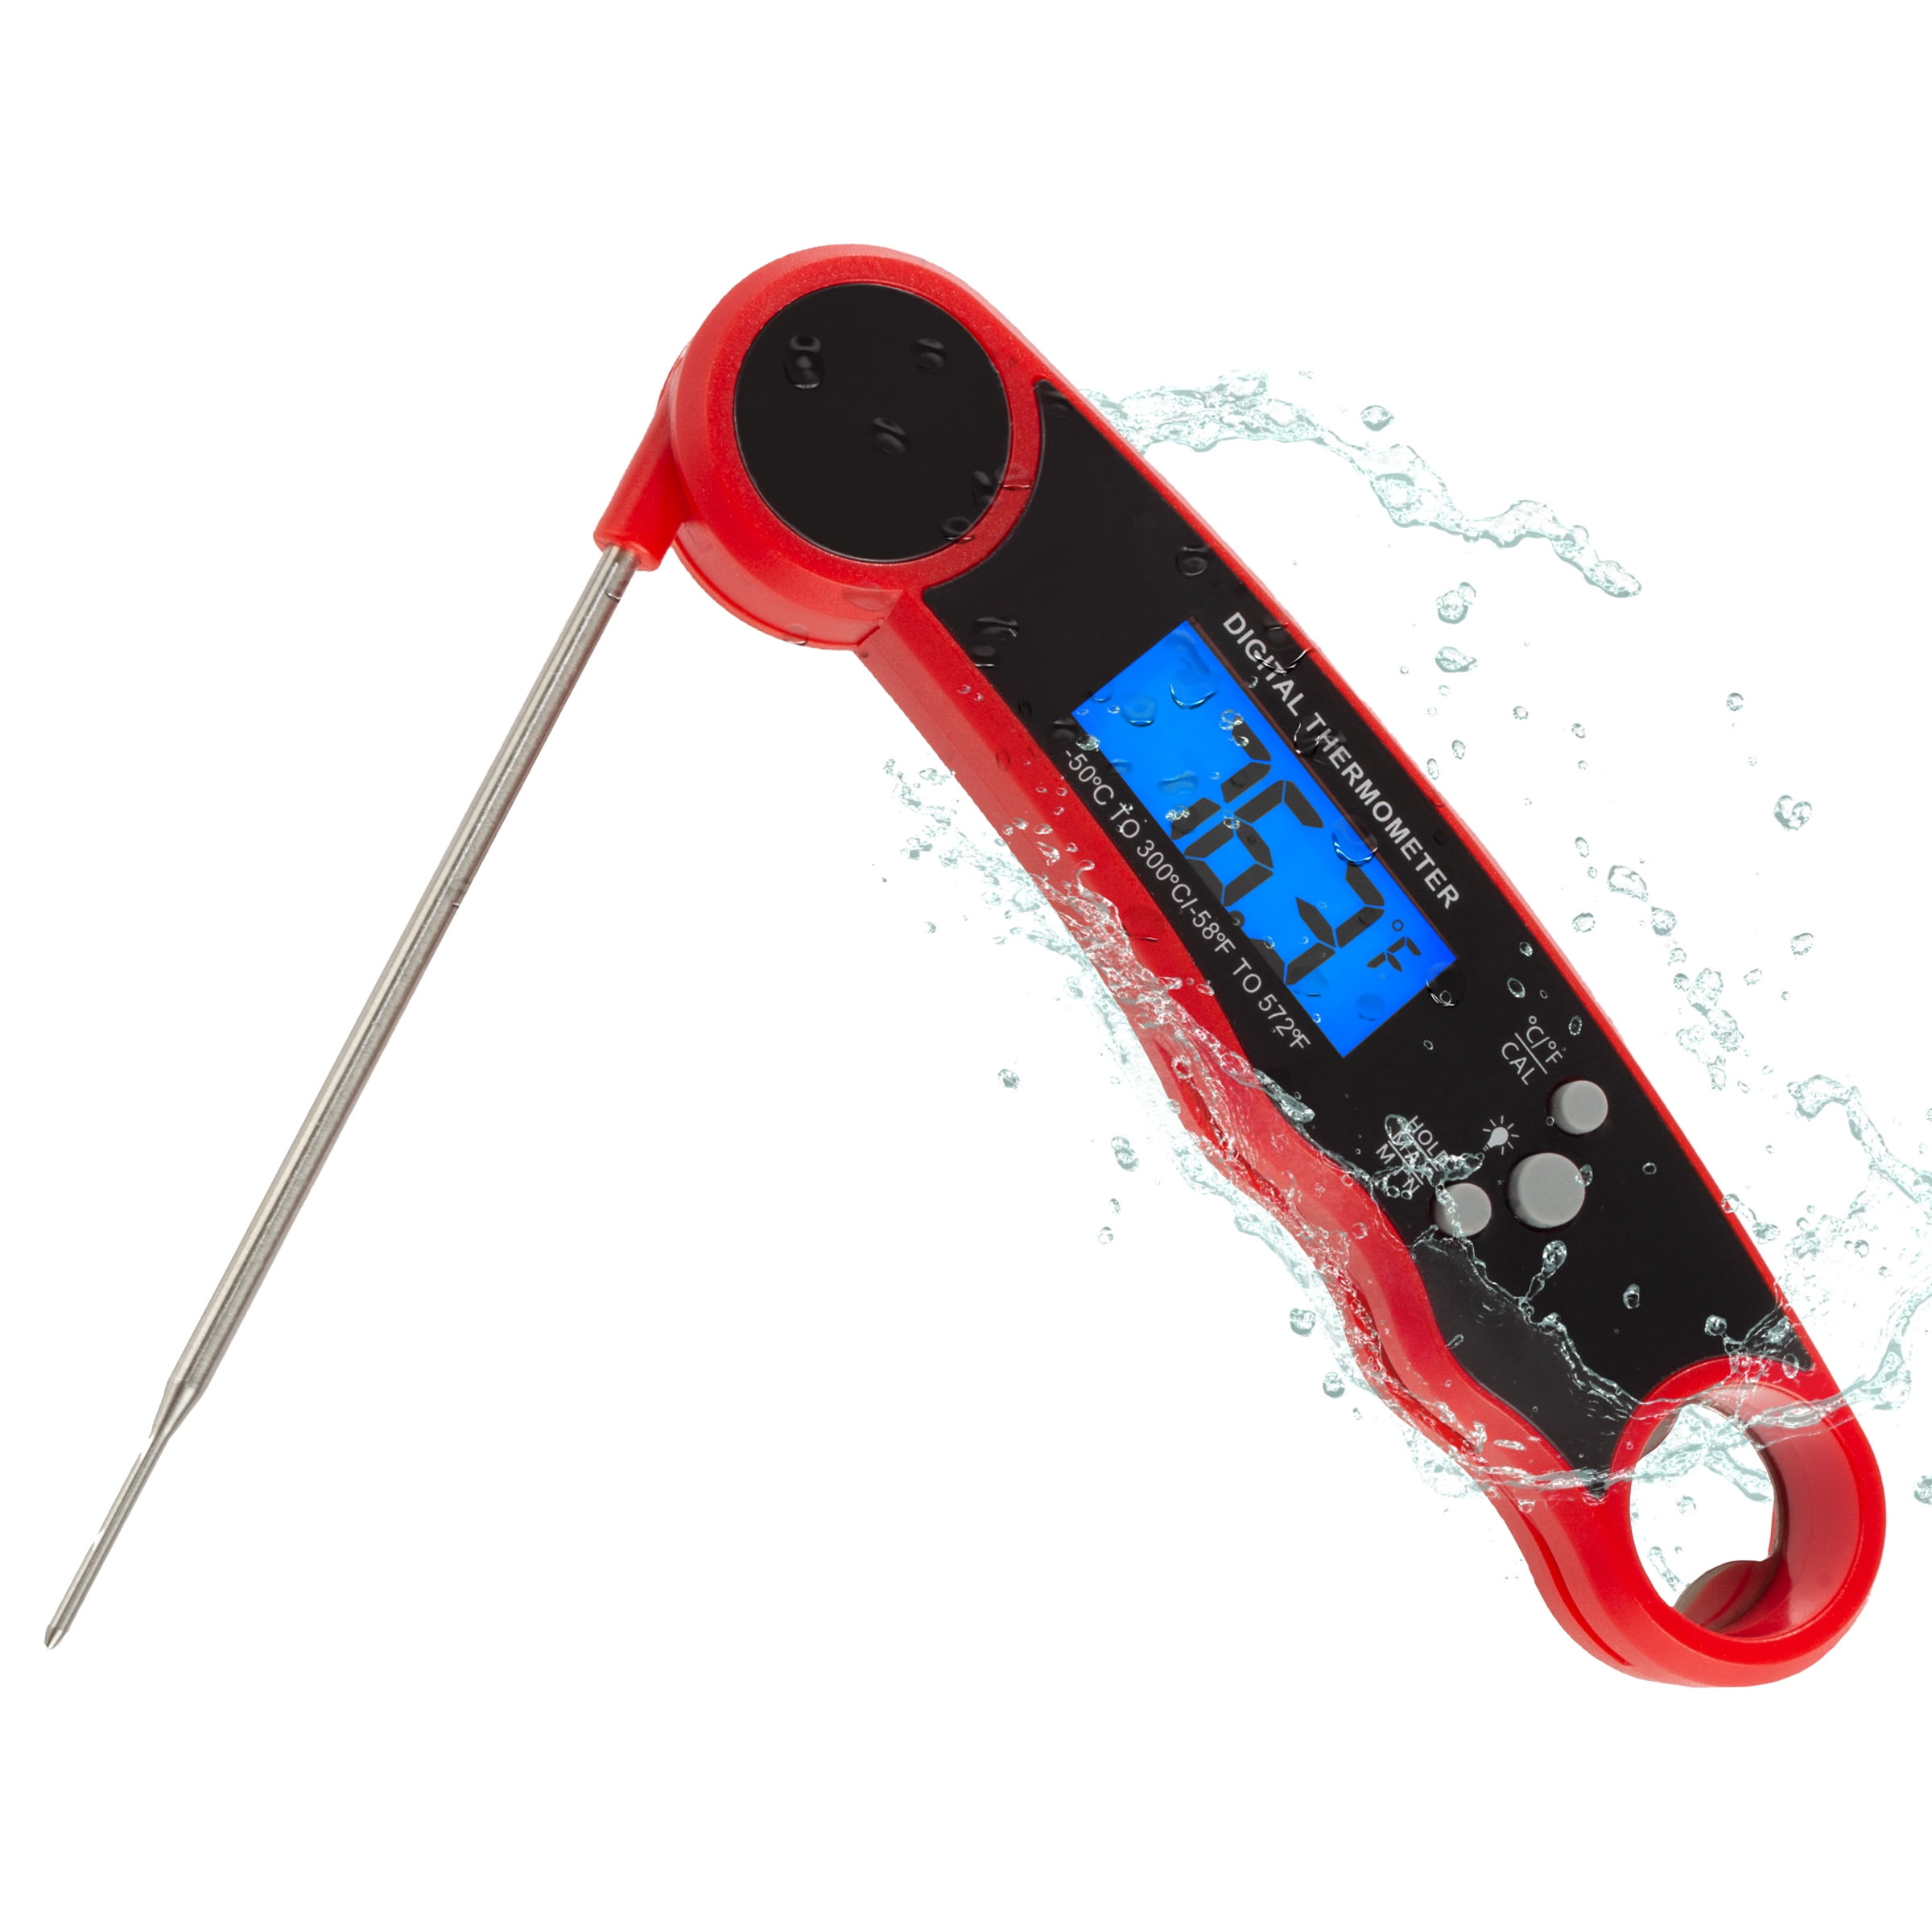 Back to School Supplies Under $5 Dqueduo Electronics Digital Thermometers  Waterproof Digital Instant Read Thermometers For Cooking Foods Baking